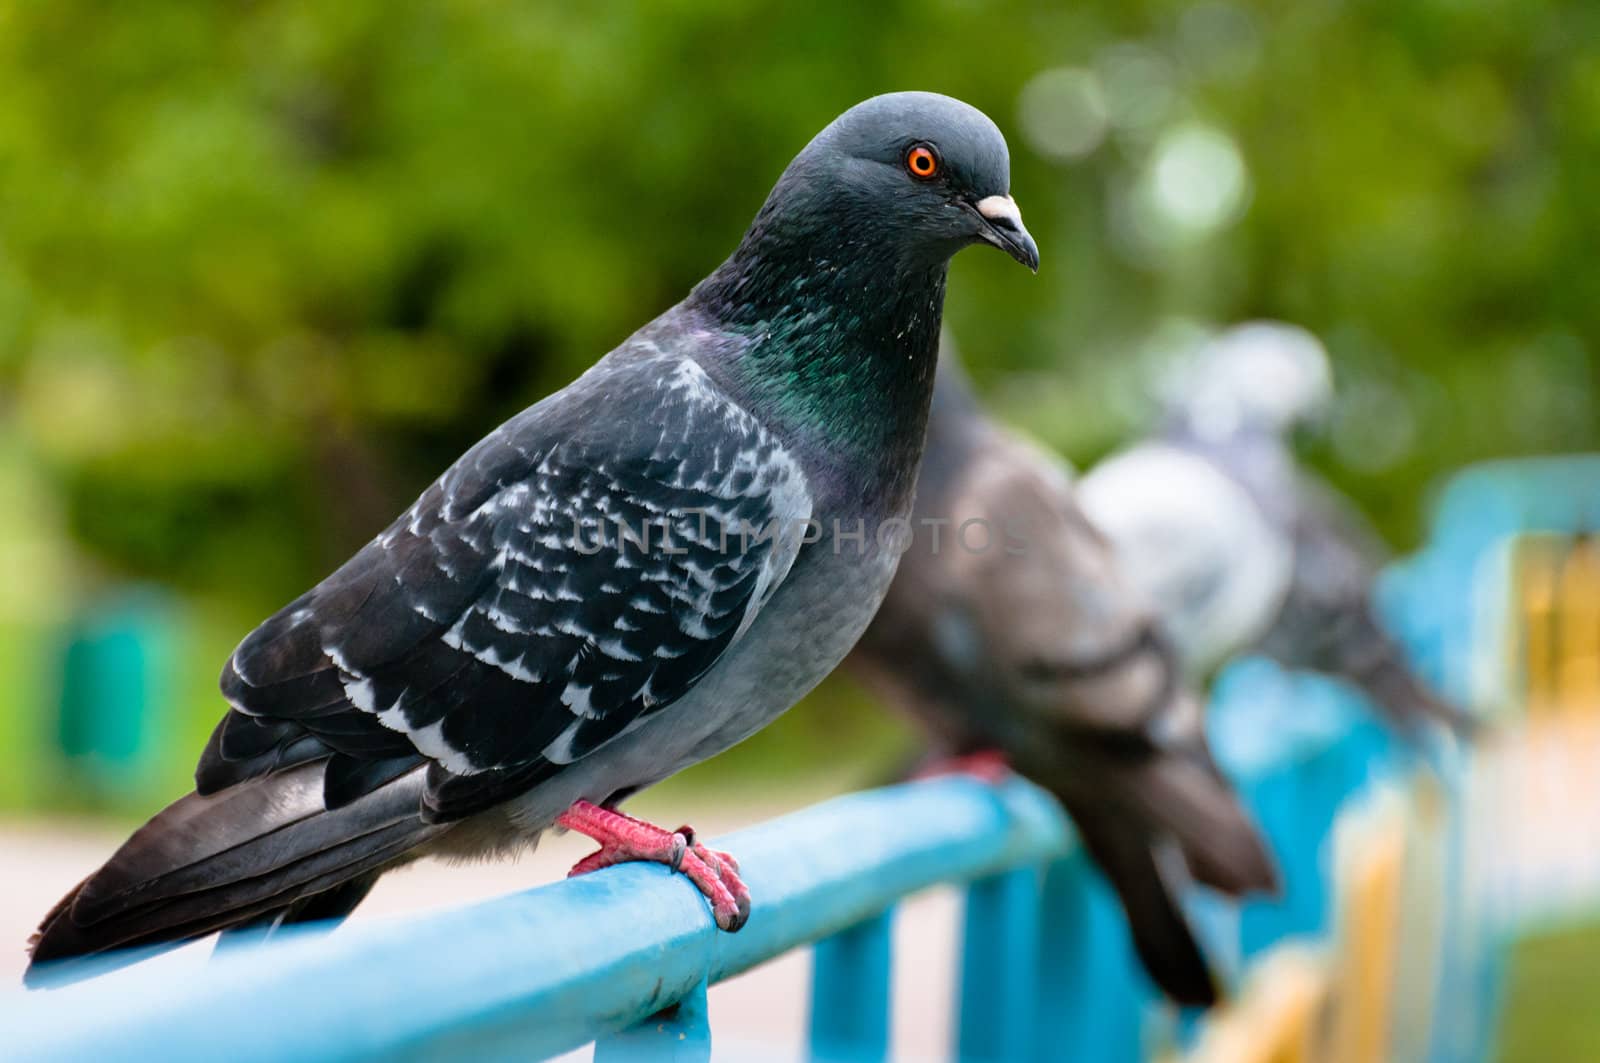 Pigeon sitting on support in park by dmitryelagin